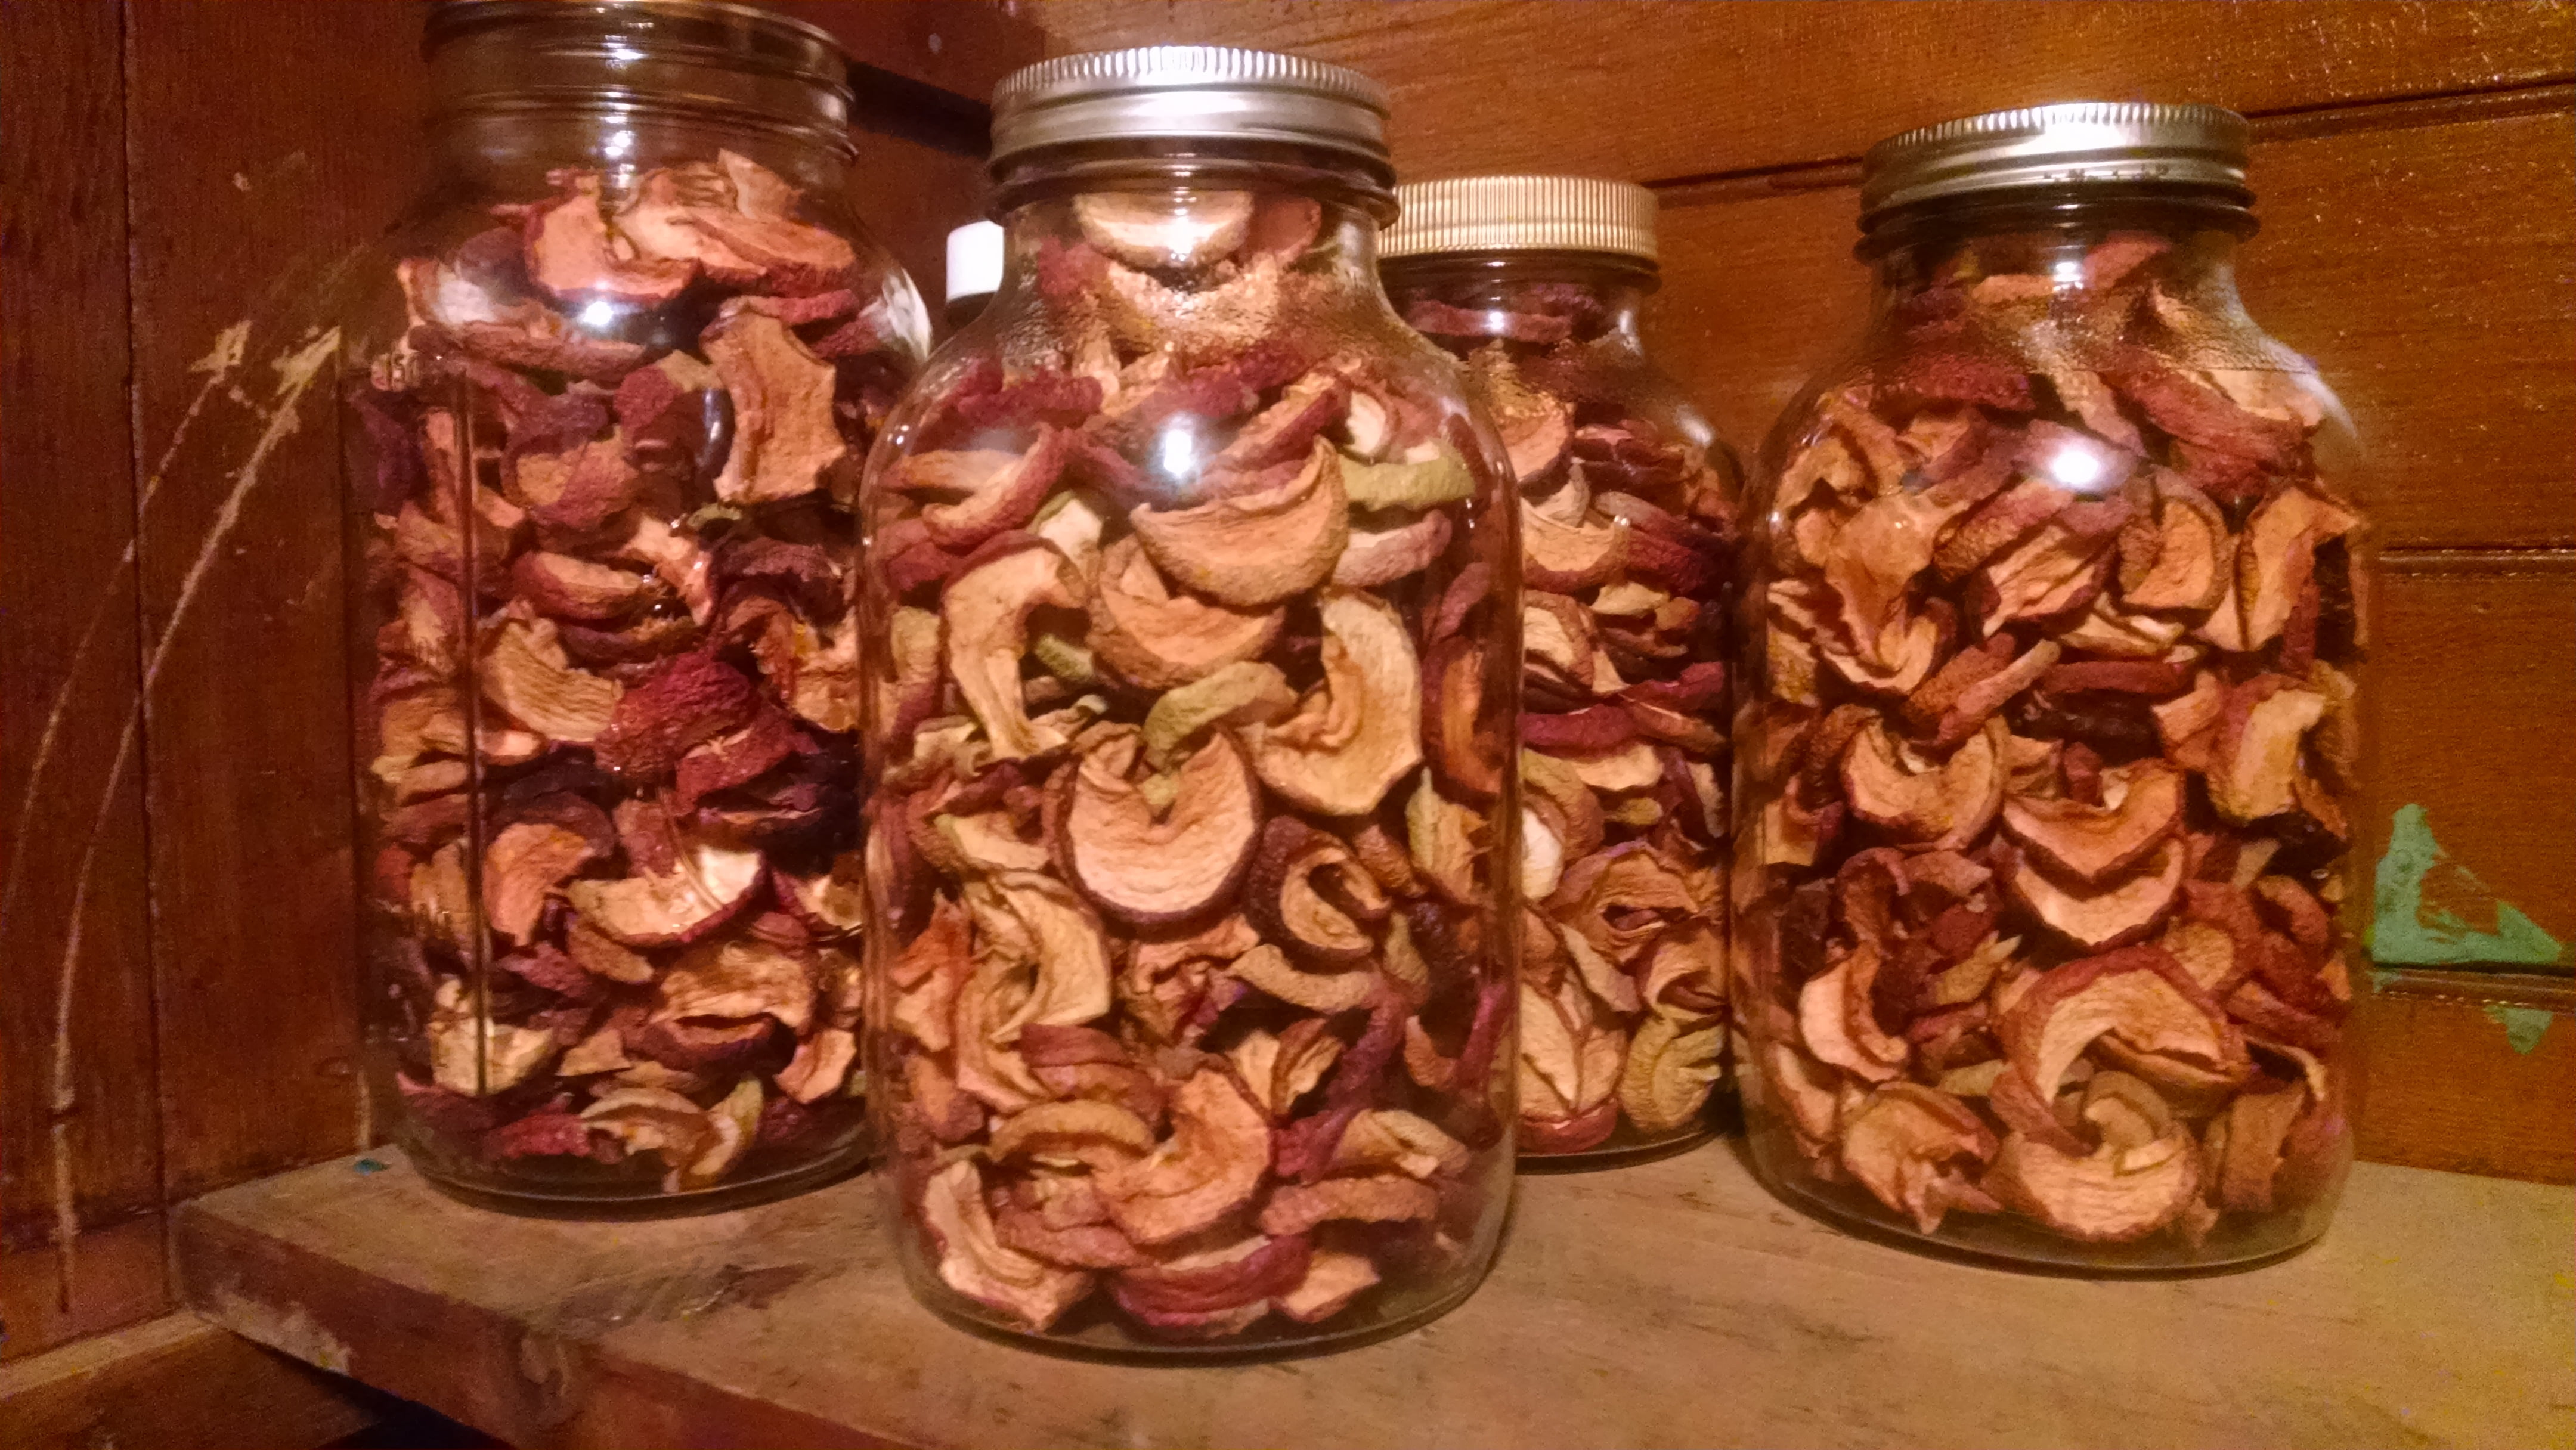 Dried apples are starting to pile up in the pantry.  By the end of the season, we should have about ten times as much piled up.